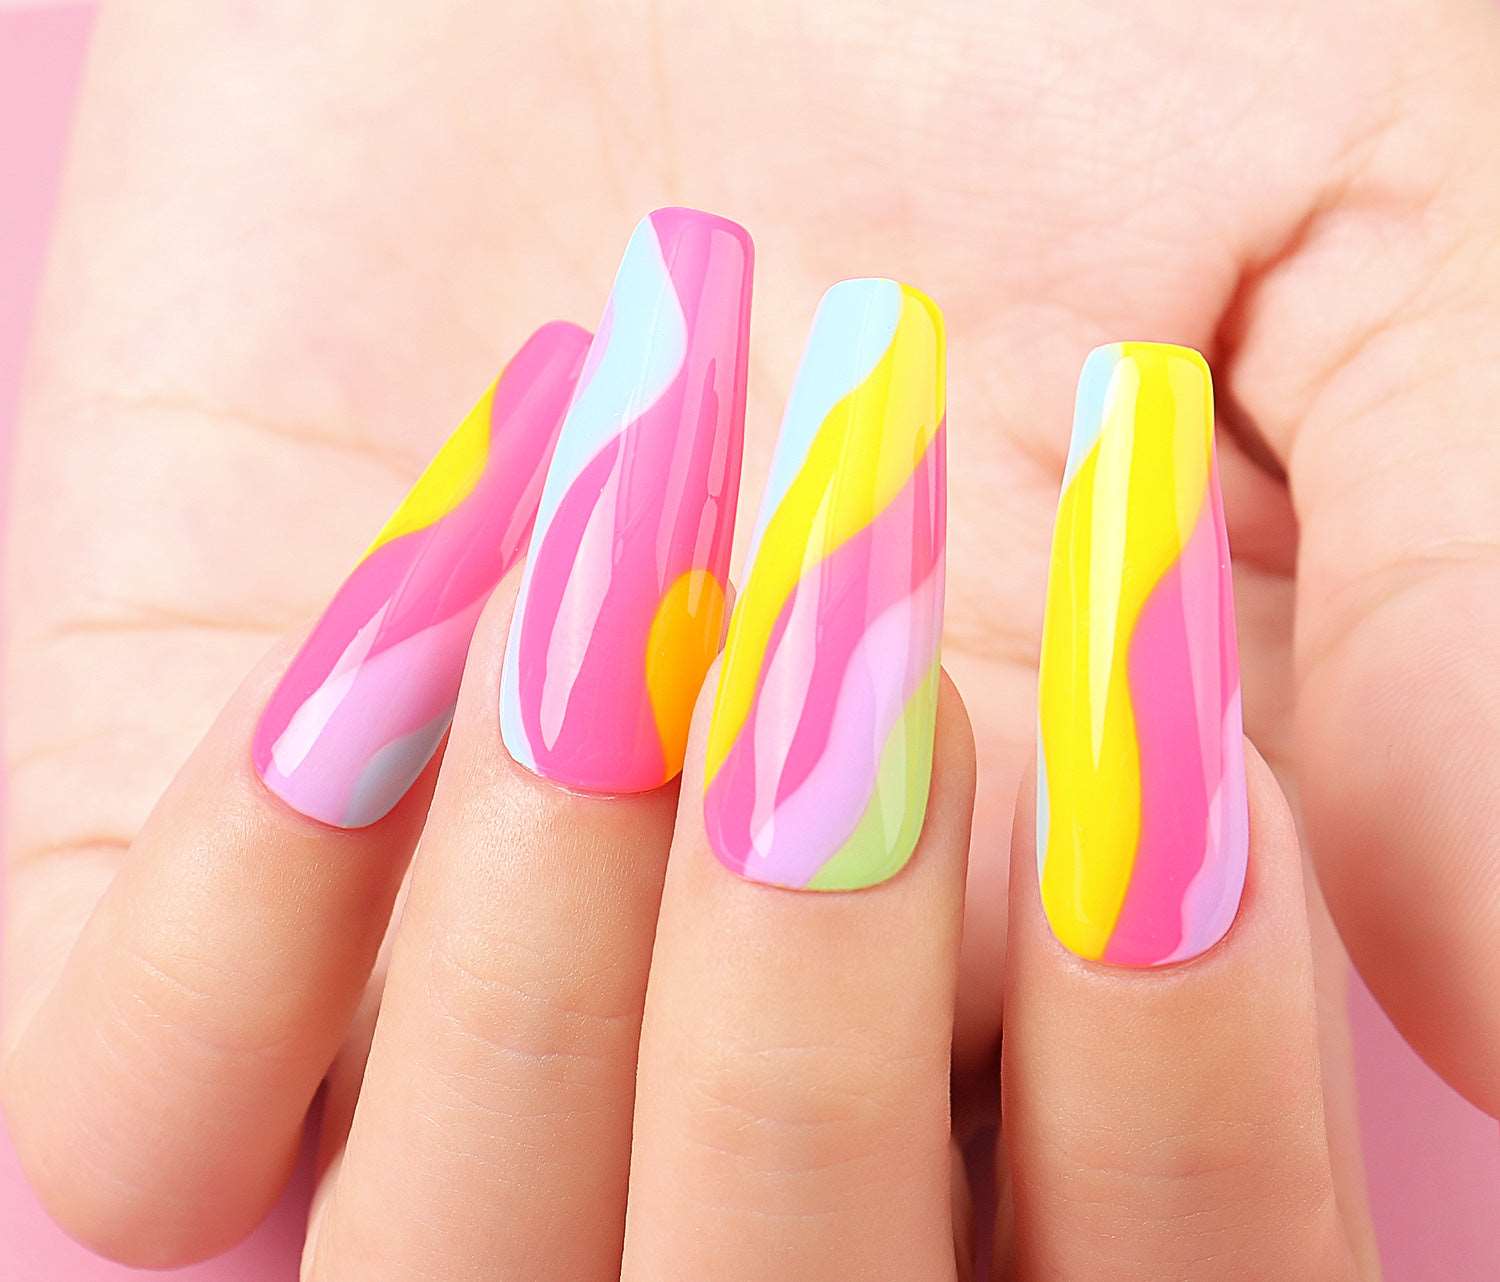 Neon Nail Art Is The Bright New Manicure Trend You Can Nail At Home